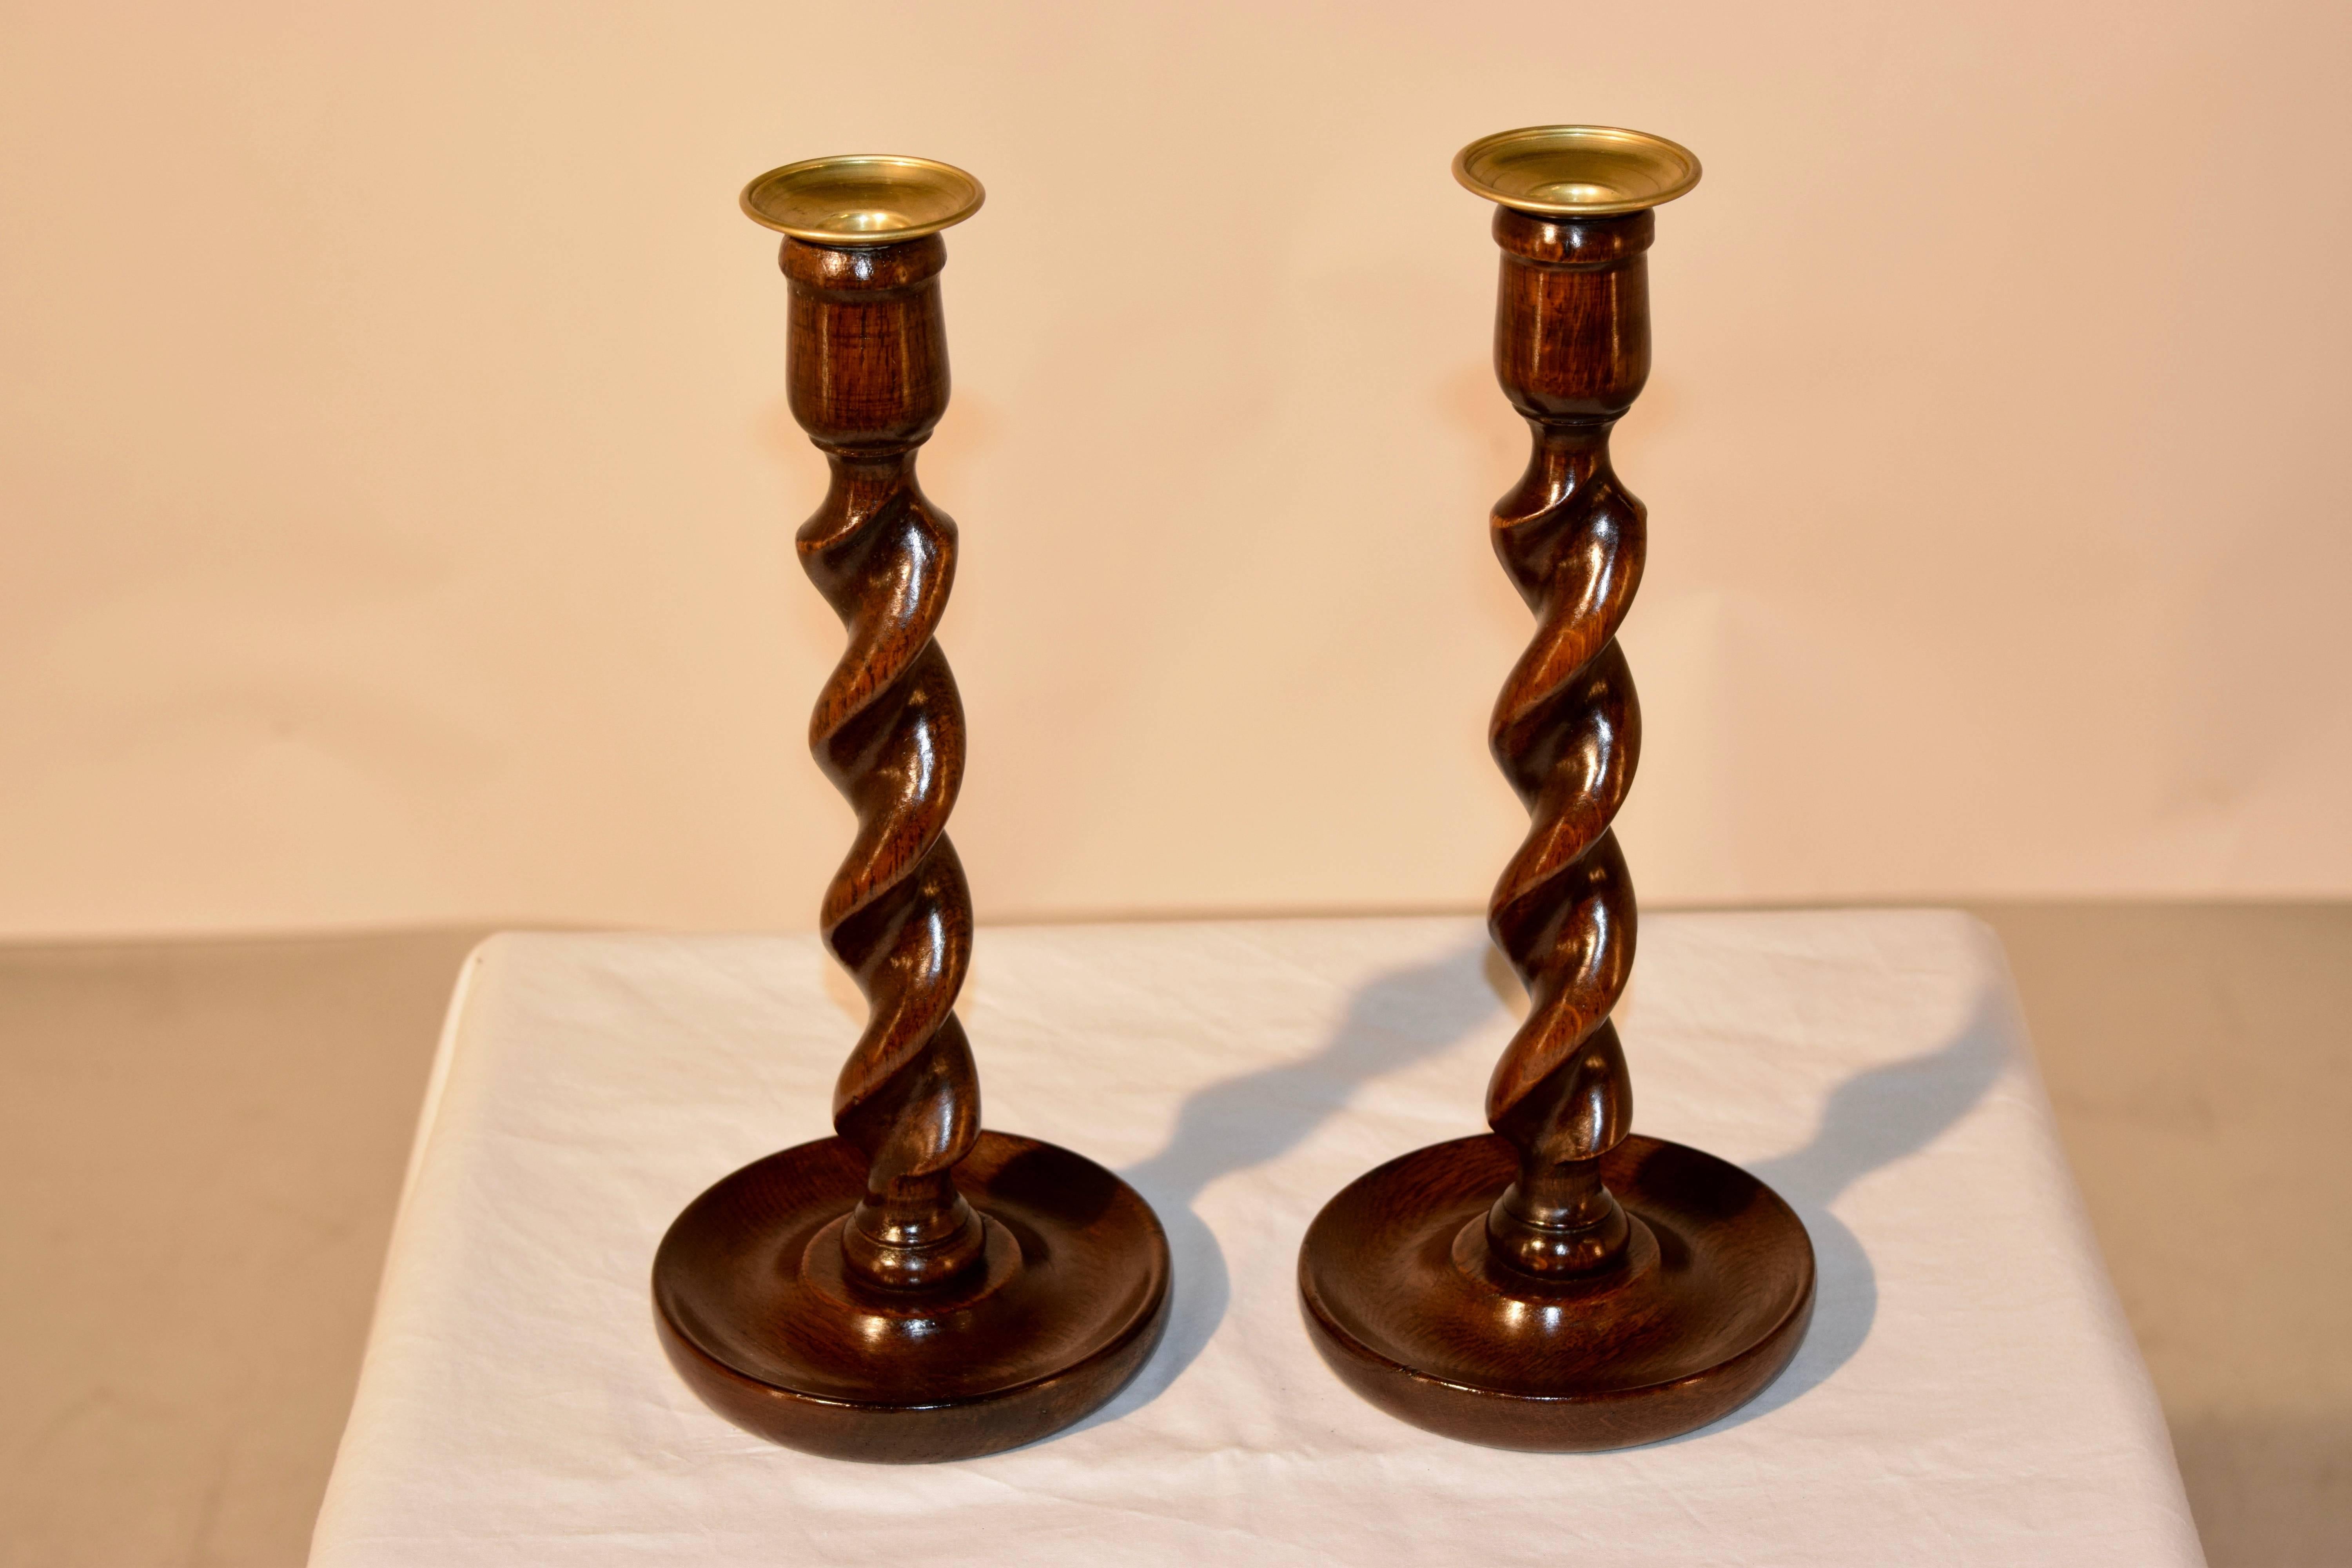 Late 19th century pair of turned oak candlesticks with hand cast brass bobeches, following down to hand-turned barley twist stems resting on hand-turned dish bases.